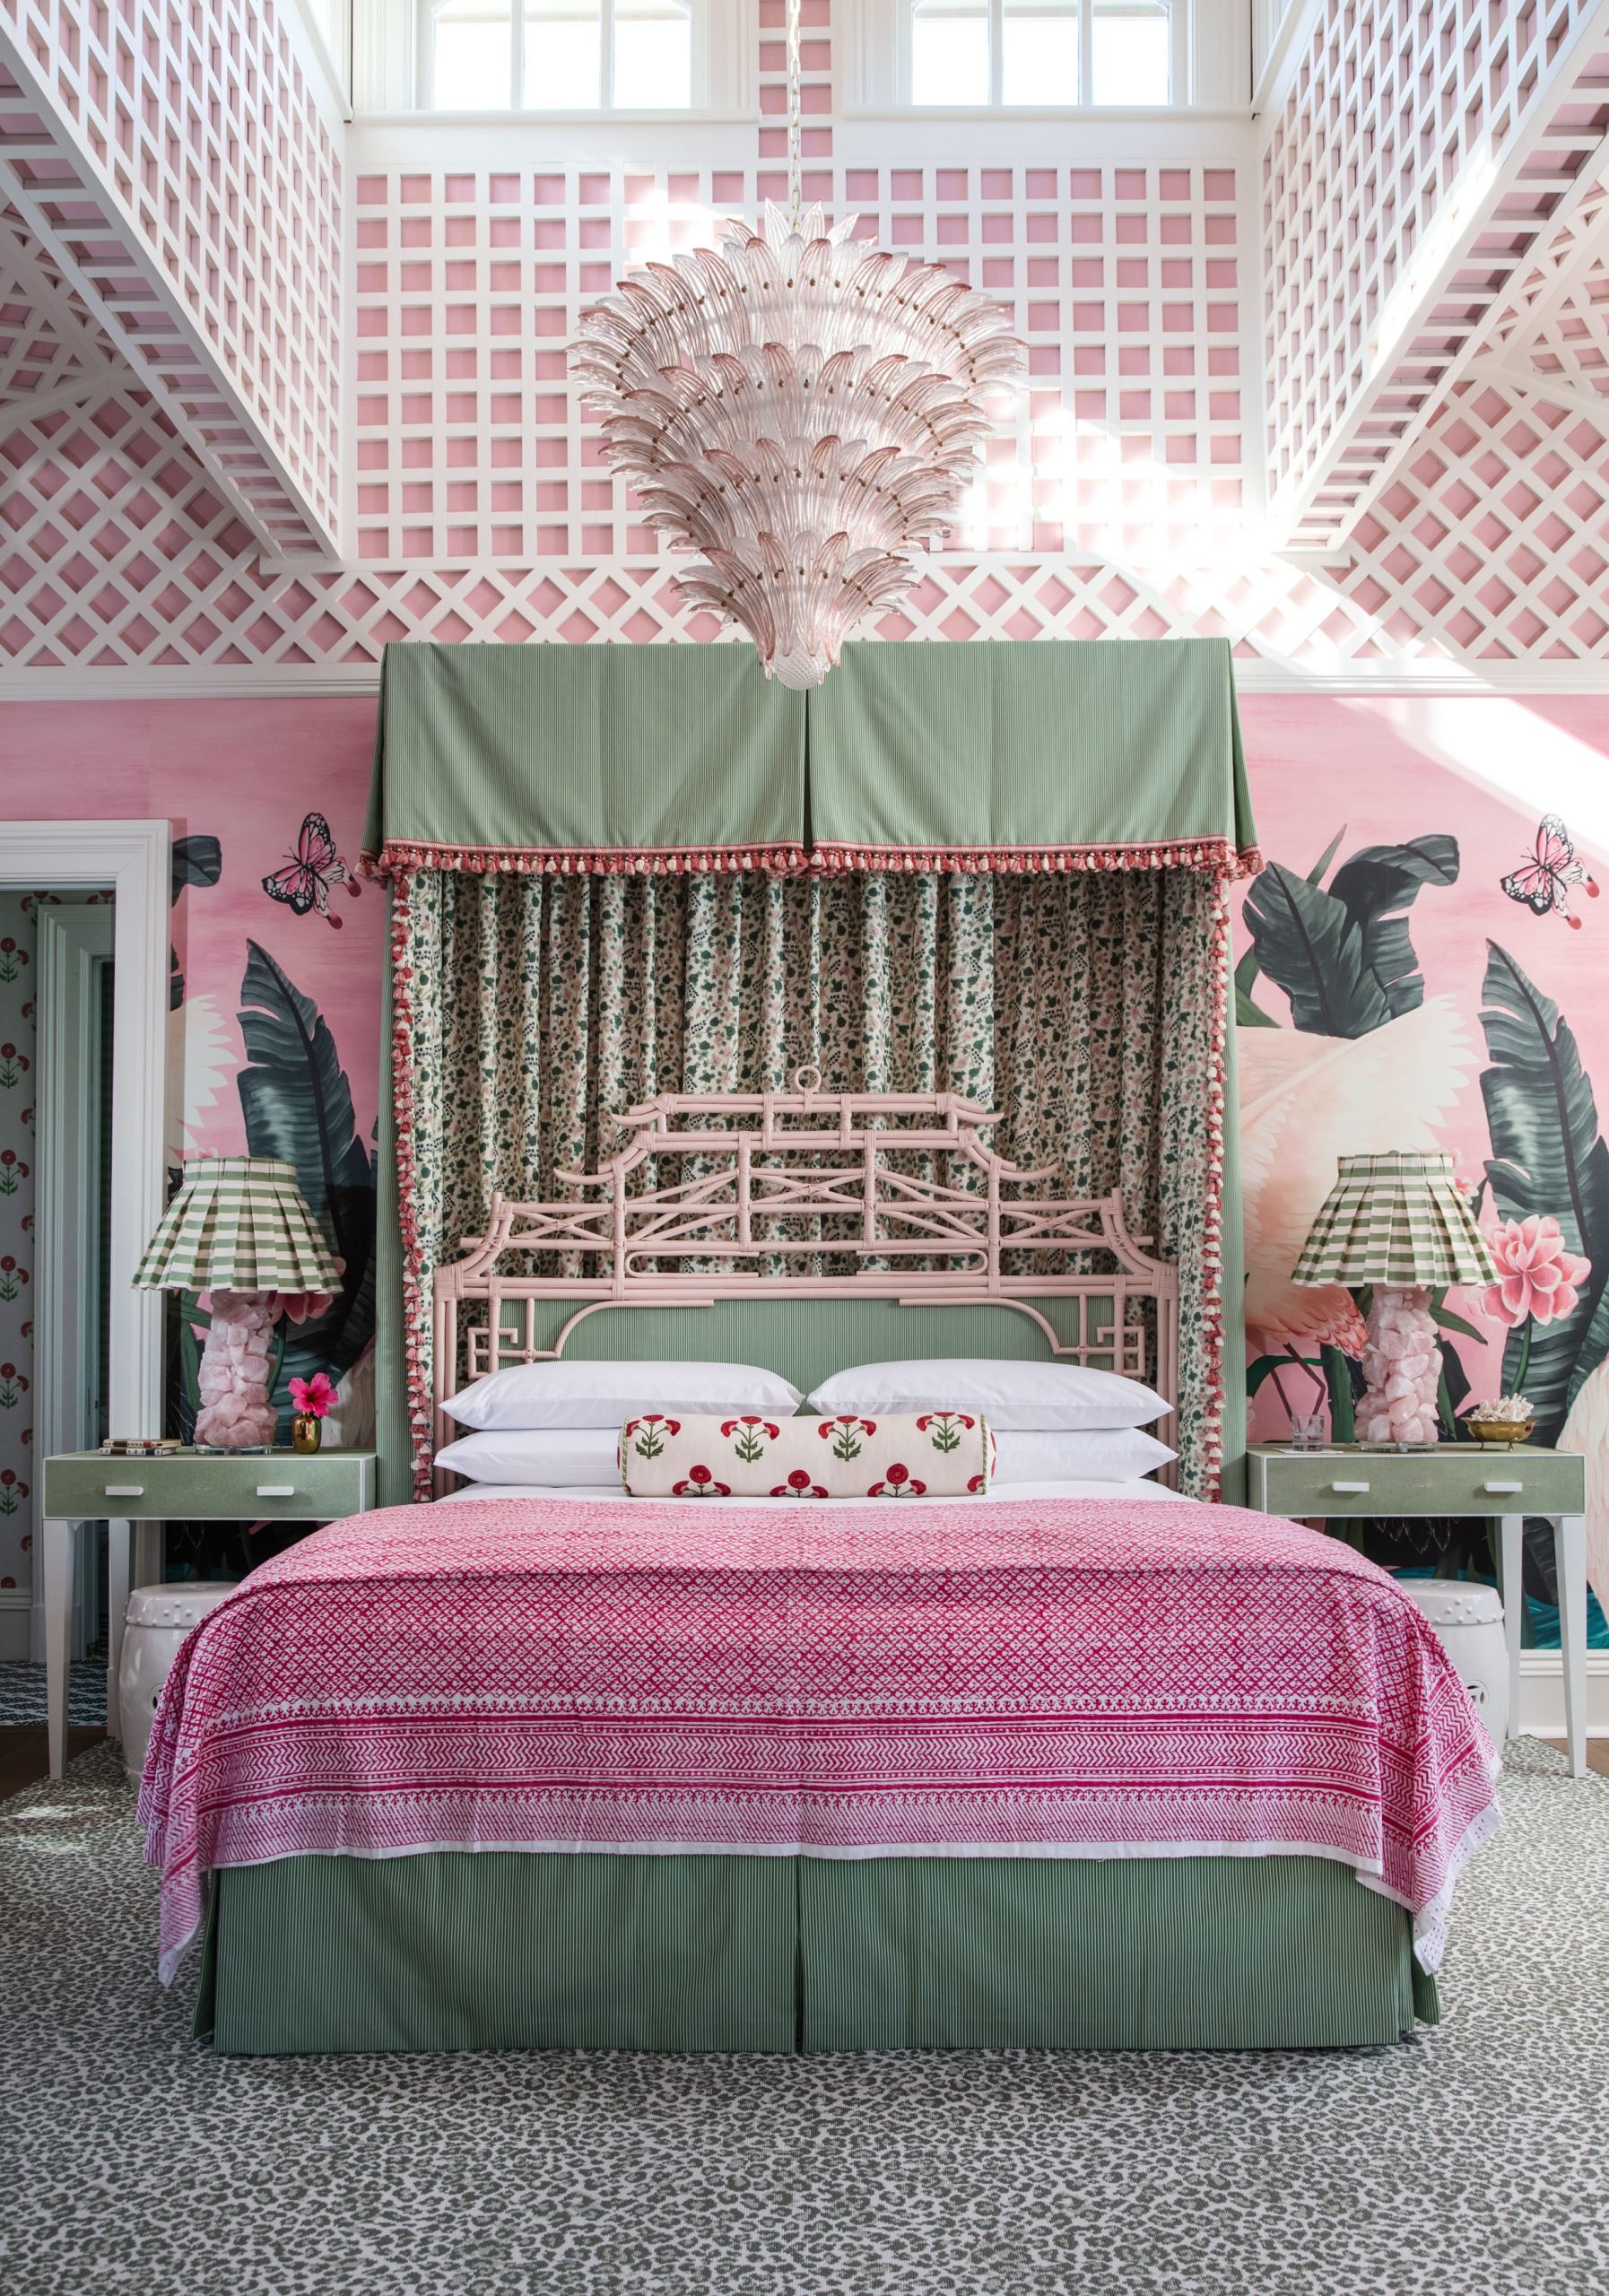 Carriage-house-suite-bed-scaled.jpg